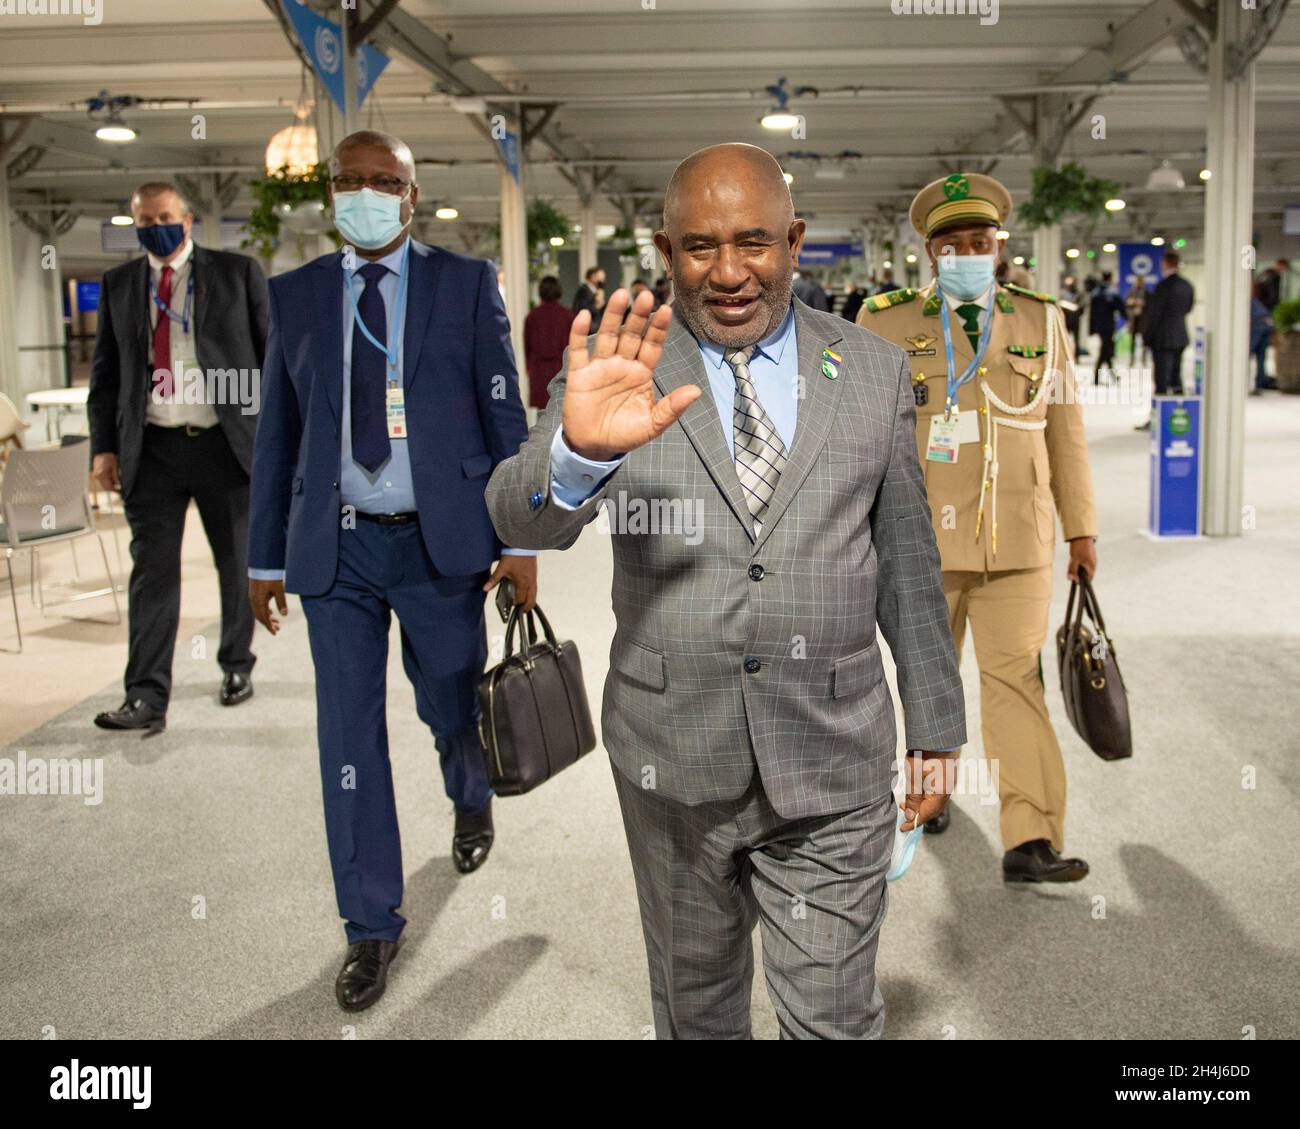 Glasgow, Scotland, UK. 2 November 2021 PICTURED: President Azali Assoumani, President of the Comoros seen at COP26. Azali Assoumani (Arabic: غزالي عثماني; born January 1, 1959) is a Comorian politician who is the current President of the Comoros, in office since 2016. Previously he was President from 1999 to 2002 and again from 2002 to 2006. He became leader of the Comoros on 30 April 1999 after leading a coup to depose acting president Tadjidine Ben Said Massounde, who he saw as pandering to the independence movement on Anjouan. He won multi-party elections in 2002, prior to which he was con Stock Photo